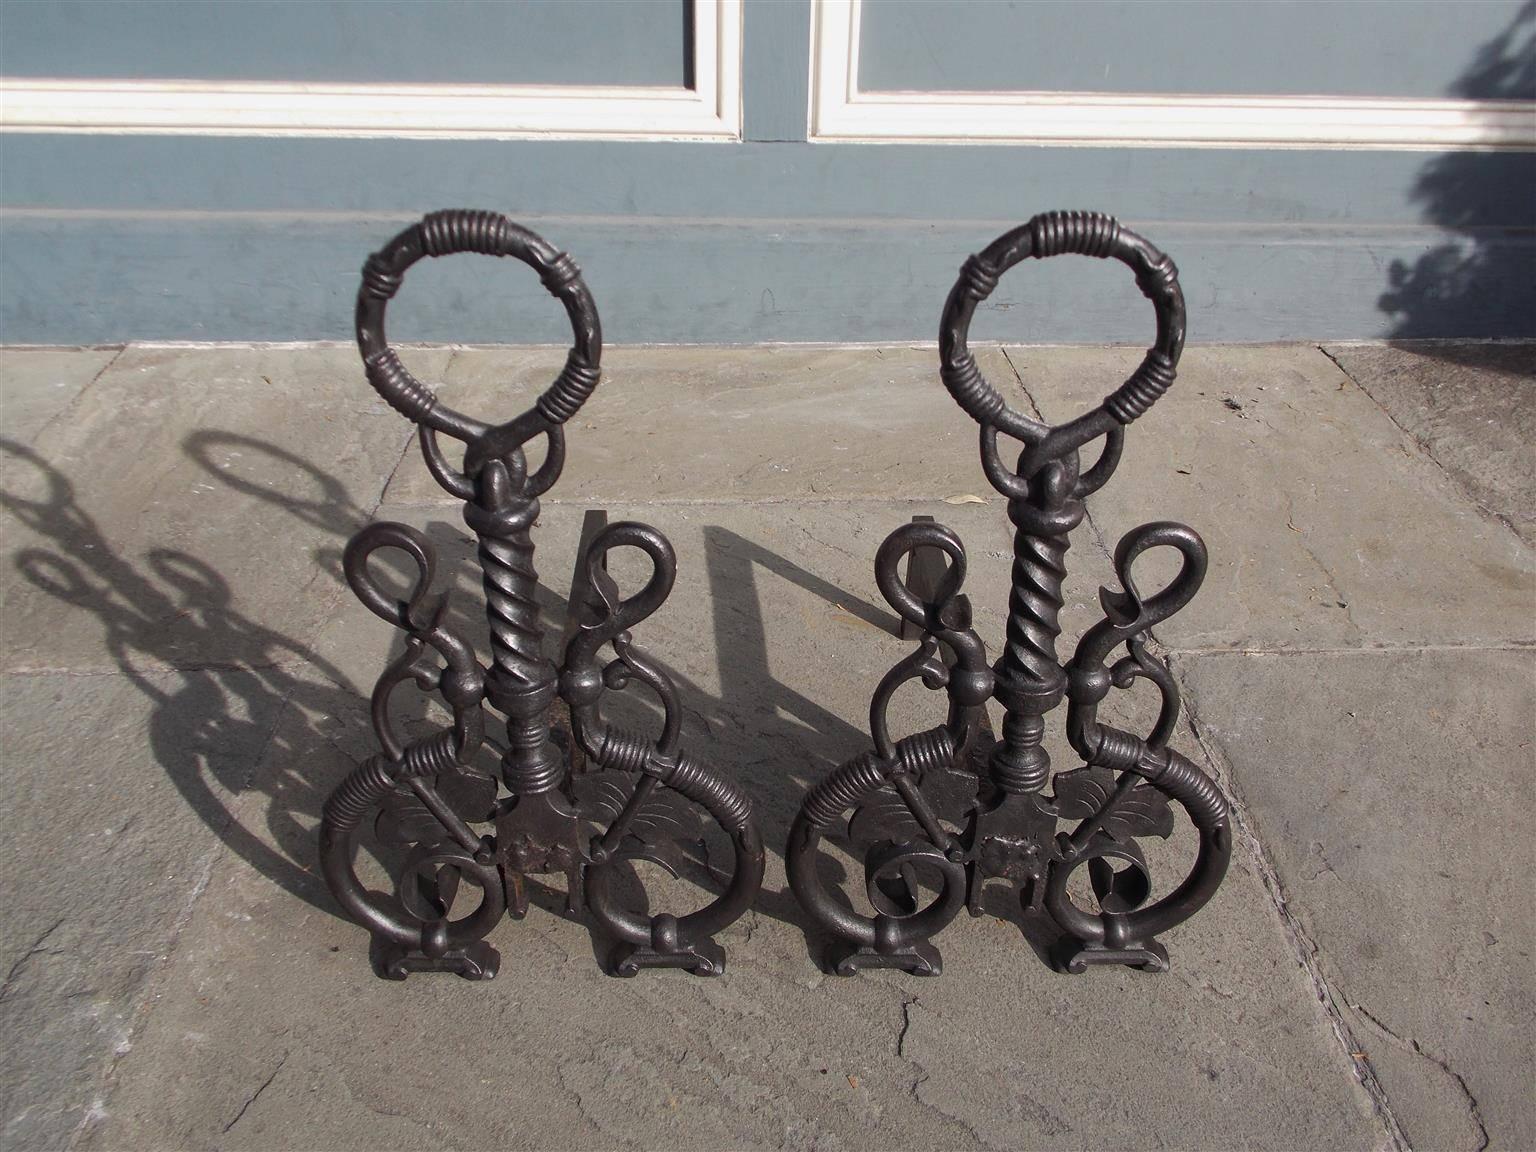 Pair of American cast iron andirons with a circular ring finial, intertwined vine, twisted center column on ringed squared plinth, decorative scroll work, and terminating on original bracket feet, Mid-19th Century.  